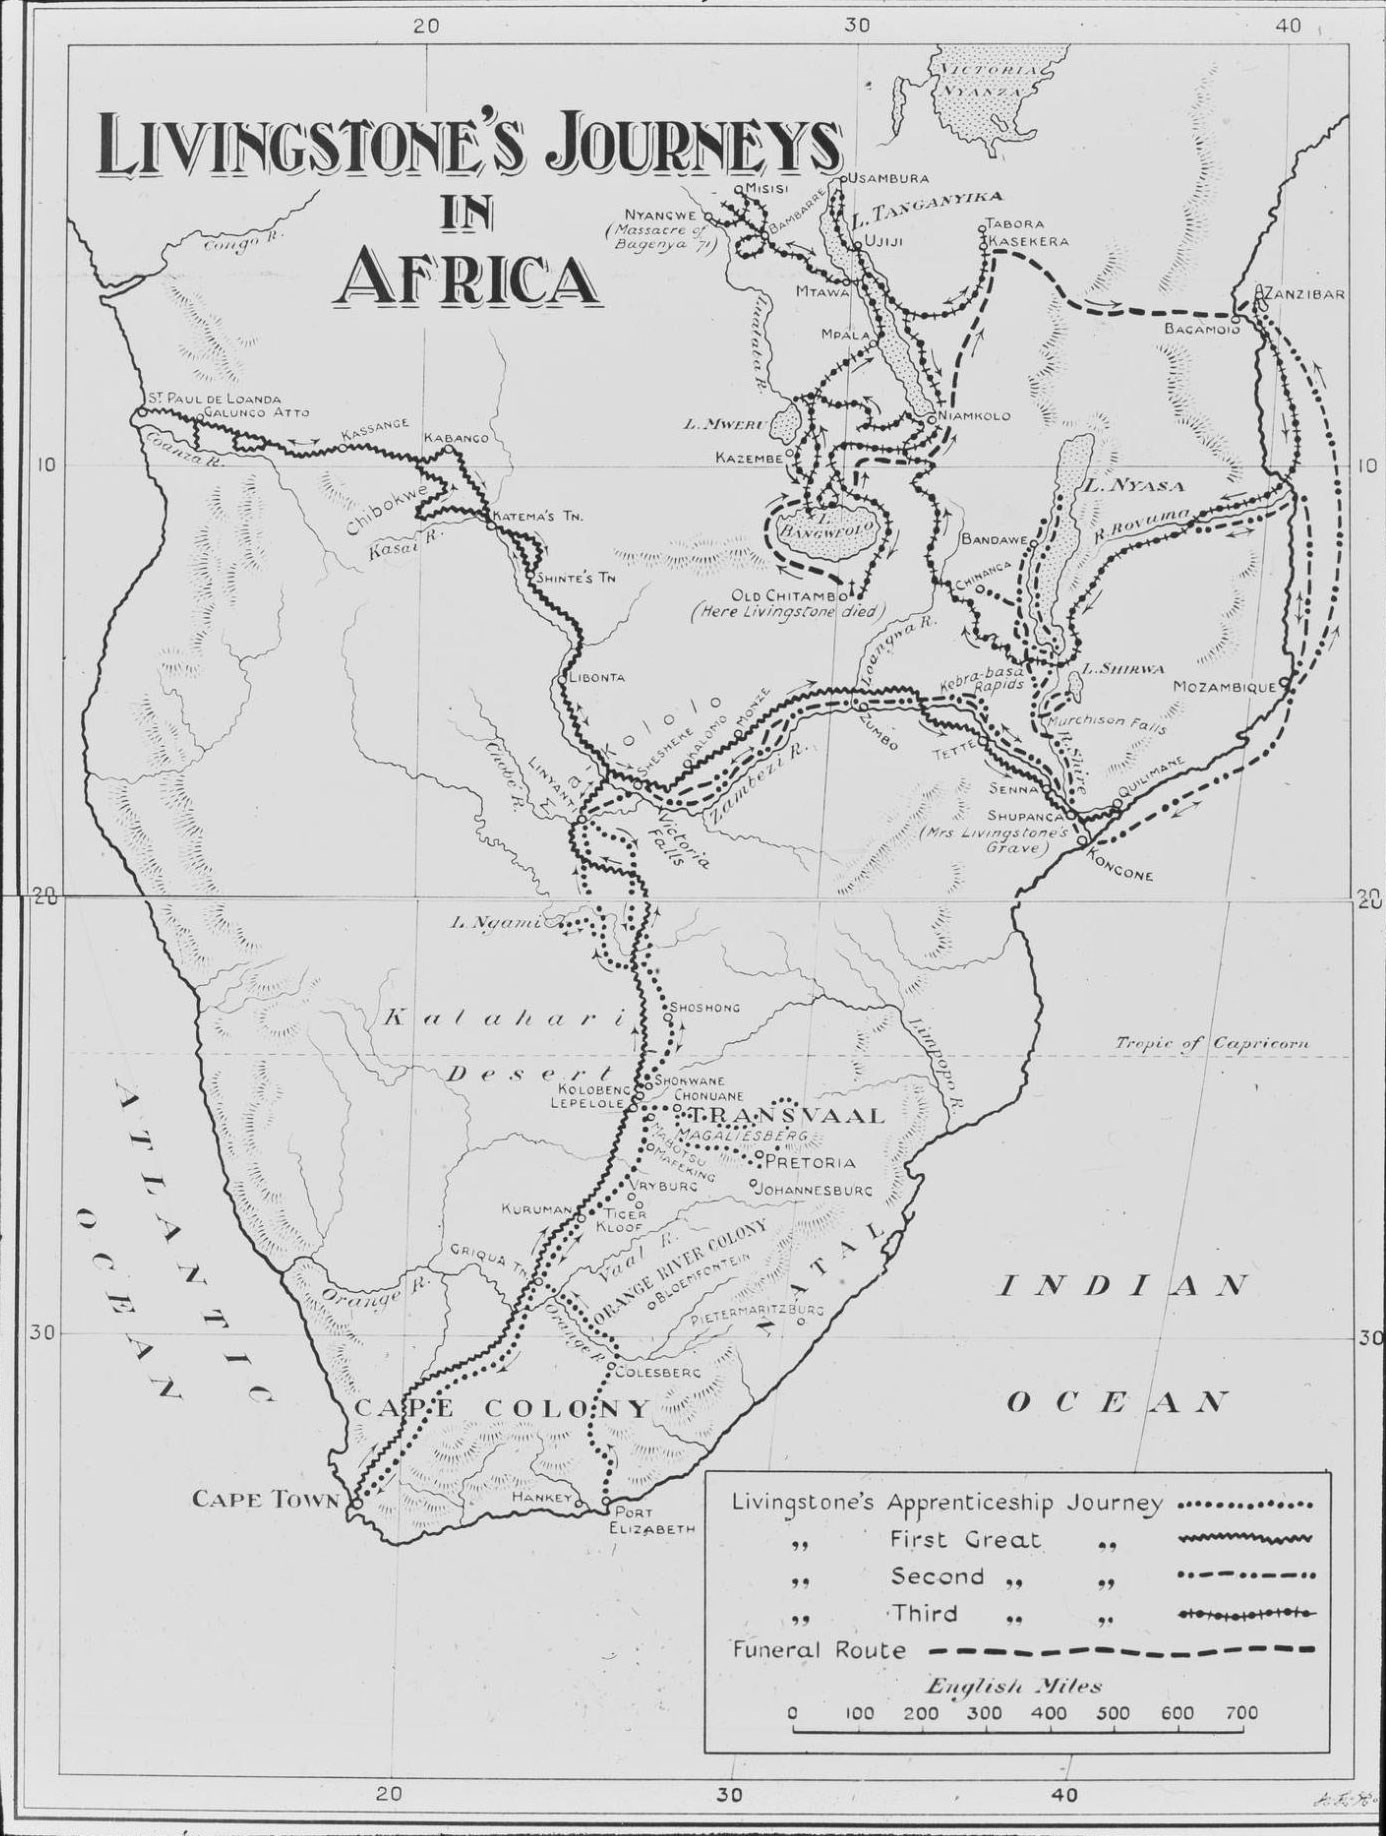 Map showing Livingstone's travels